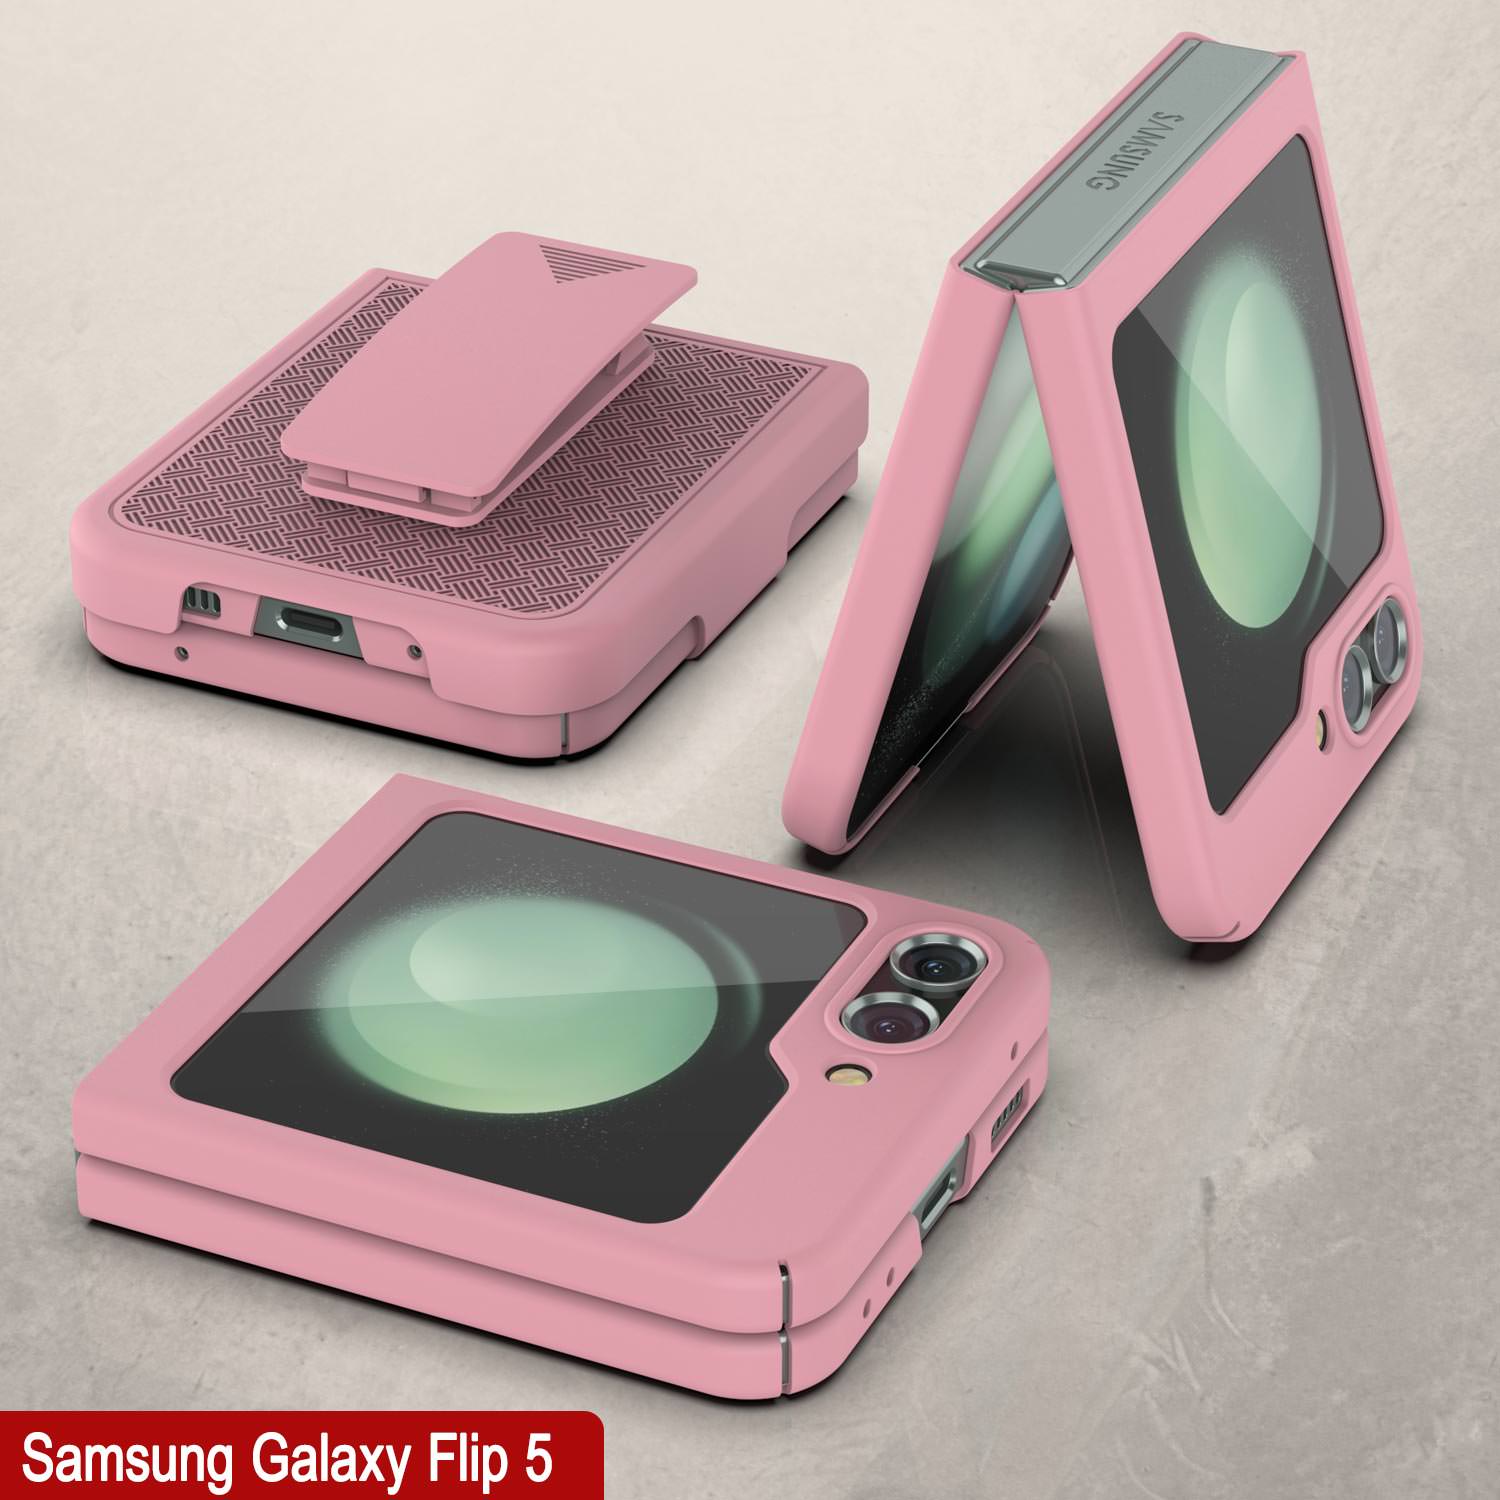 Galaxy Z Flip5 Case With Tempered Glass Screen Protector, Holster Belt Clip & Built-In Kickstand [Pink]